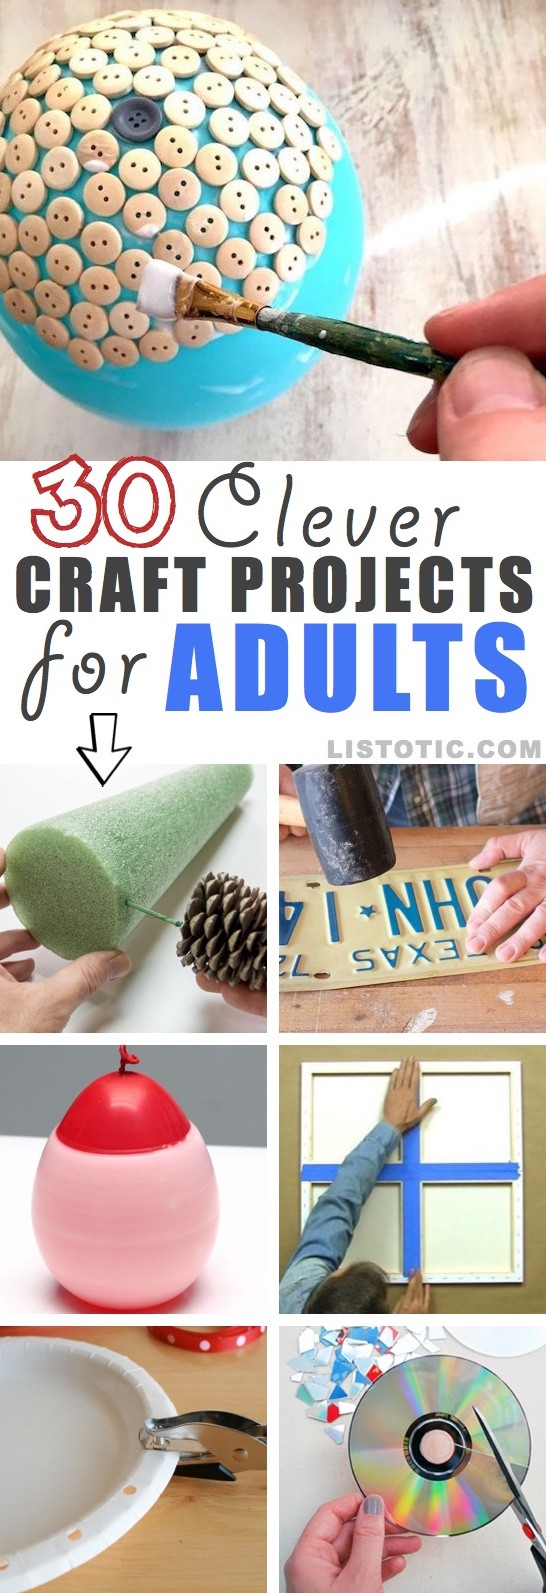 Fun Crafts For Adults
 30 Easy Craft Ideas That Will Spark Your Creativity DIY